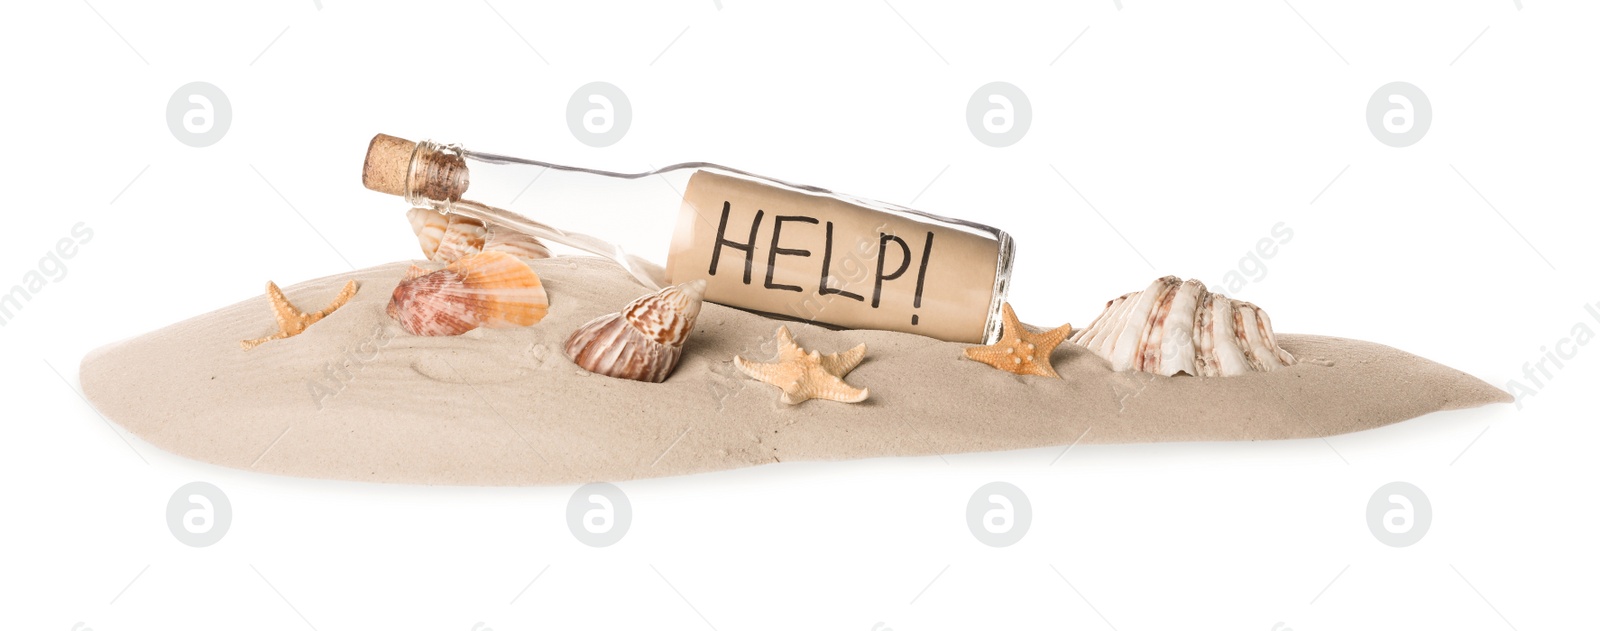 Photo of Corked glass bottle with Help note and seashells on sand against white background